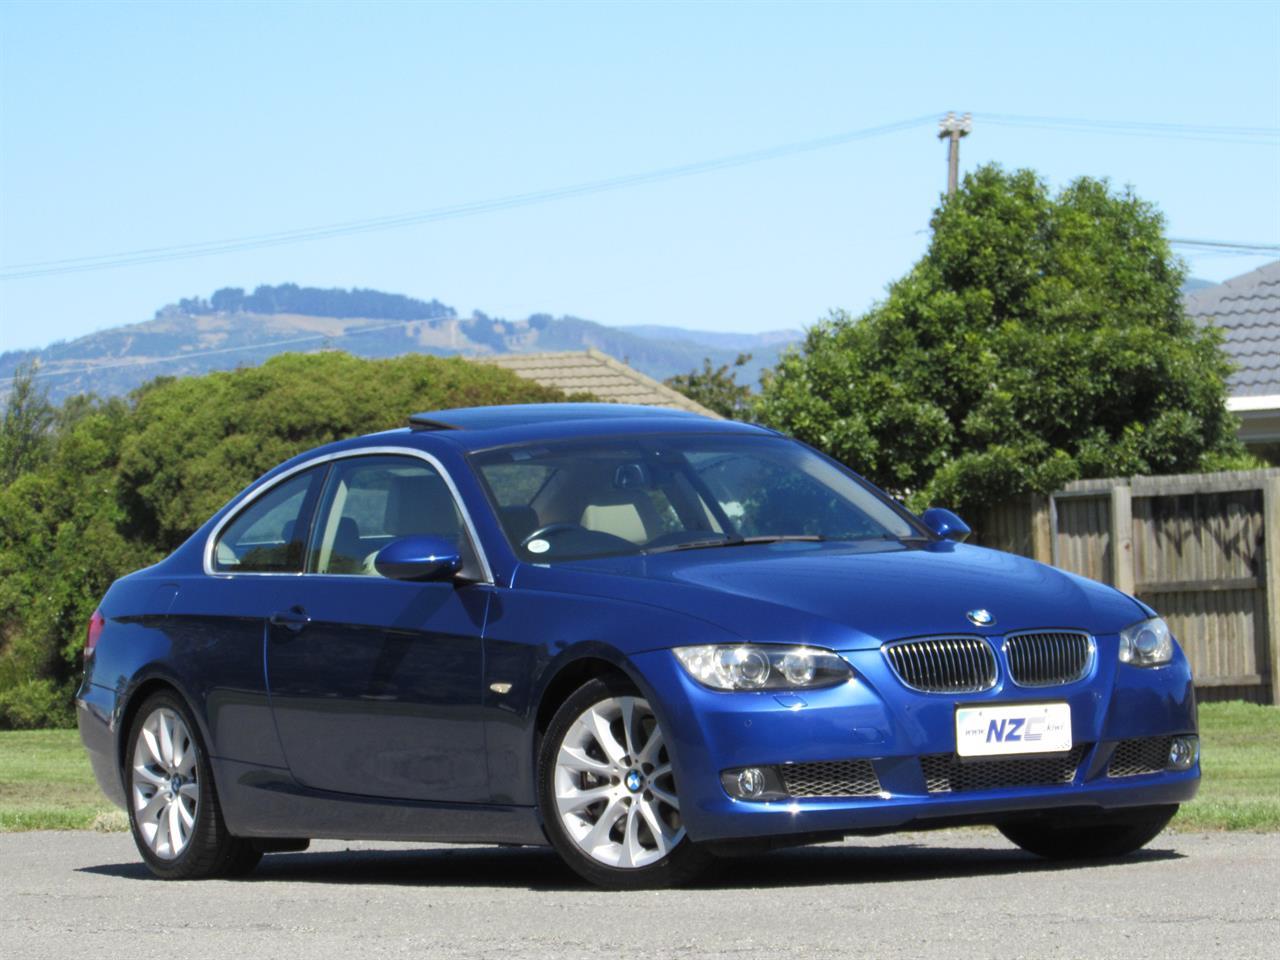 NZC best hot price for 2008 BMW 335I in Christchurch